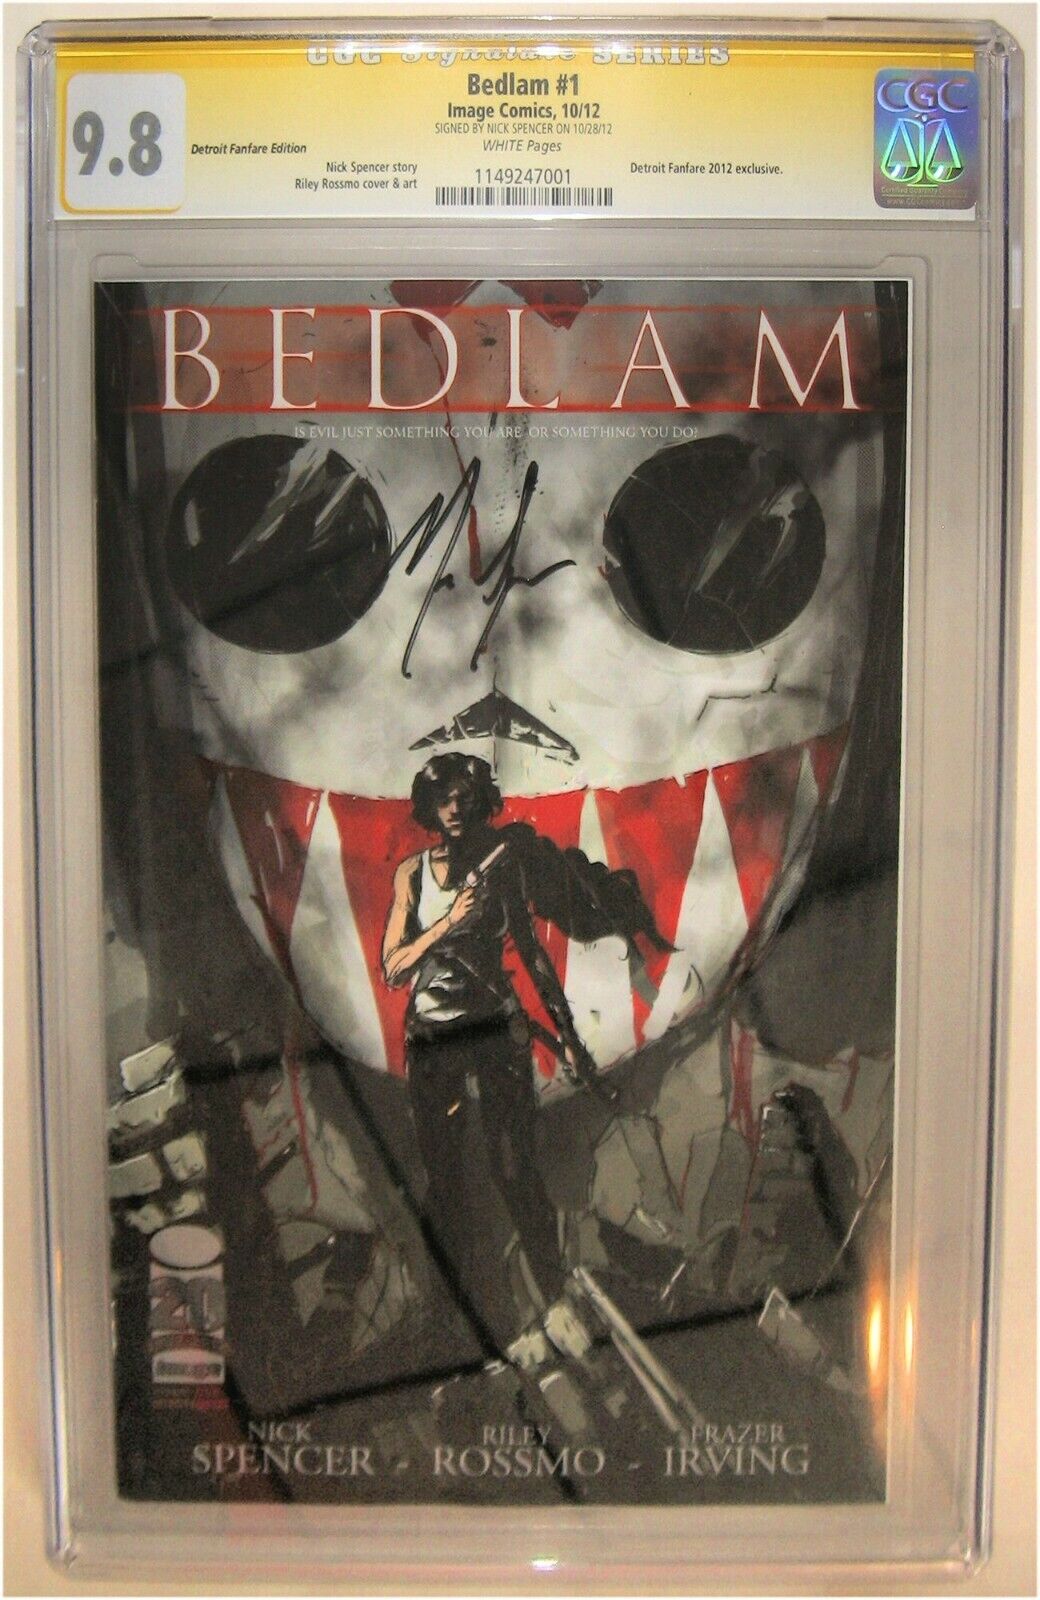 BEDLAM #1 CGC 9.8 SS SIGNED NICK SPENCER DETROIT FANFARE Variant Limited to 500